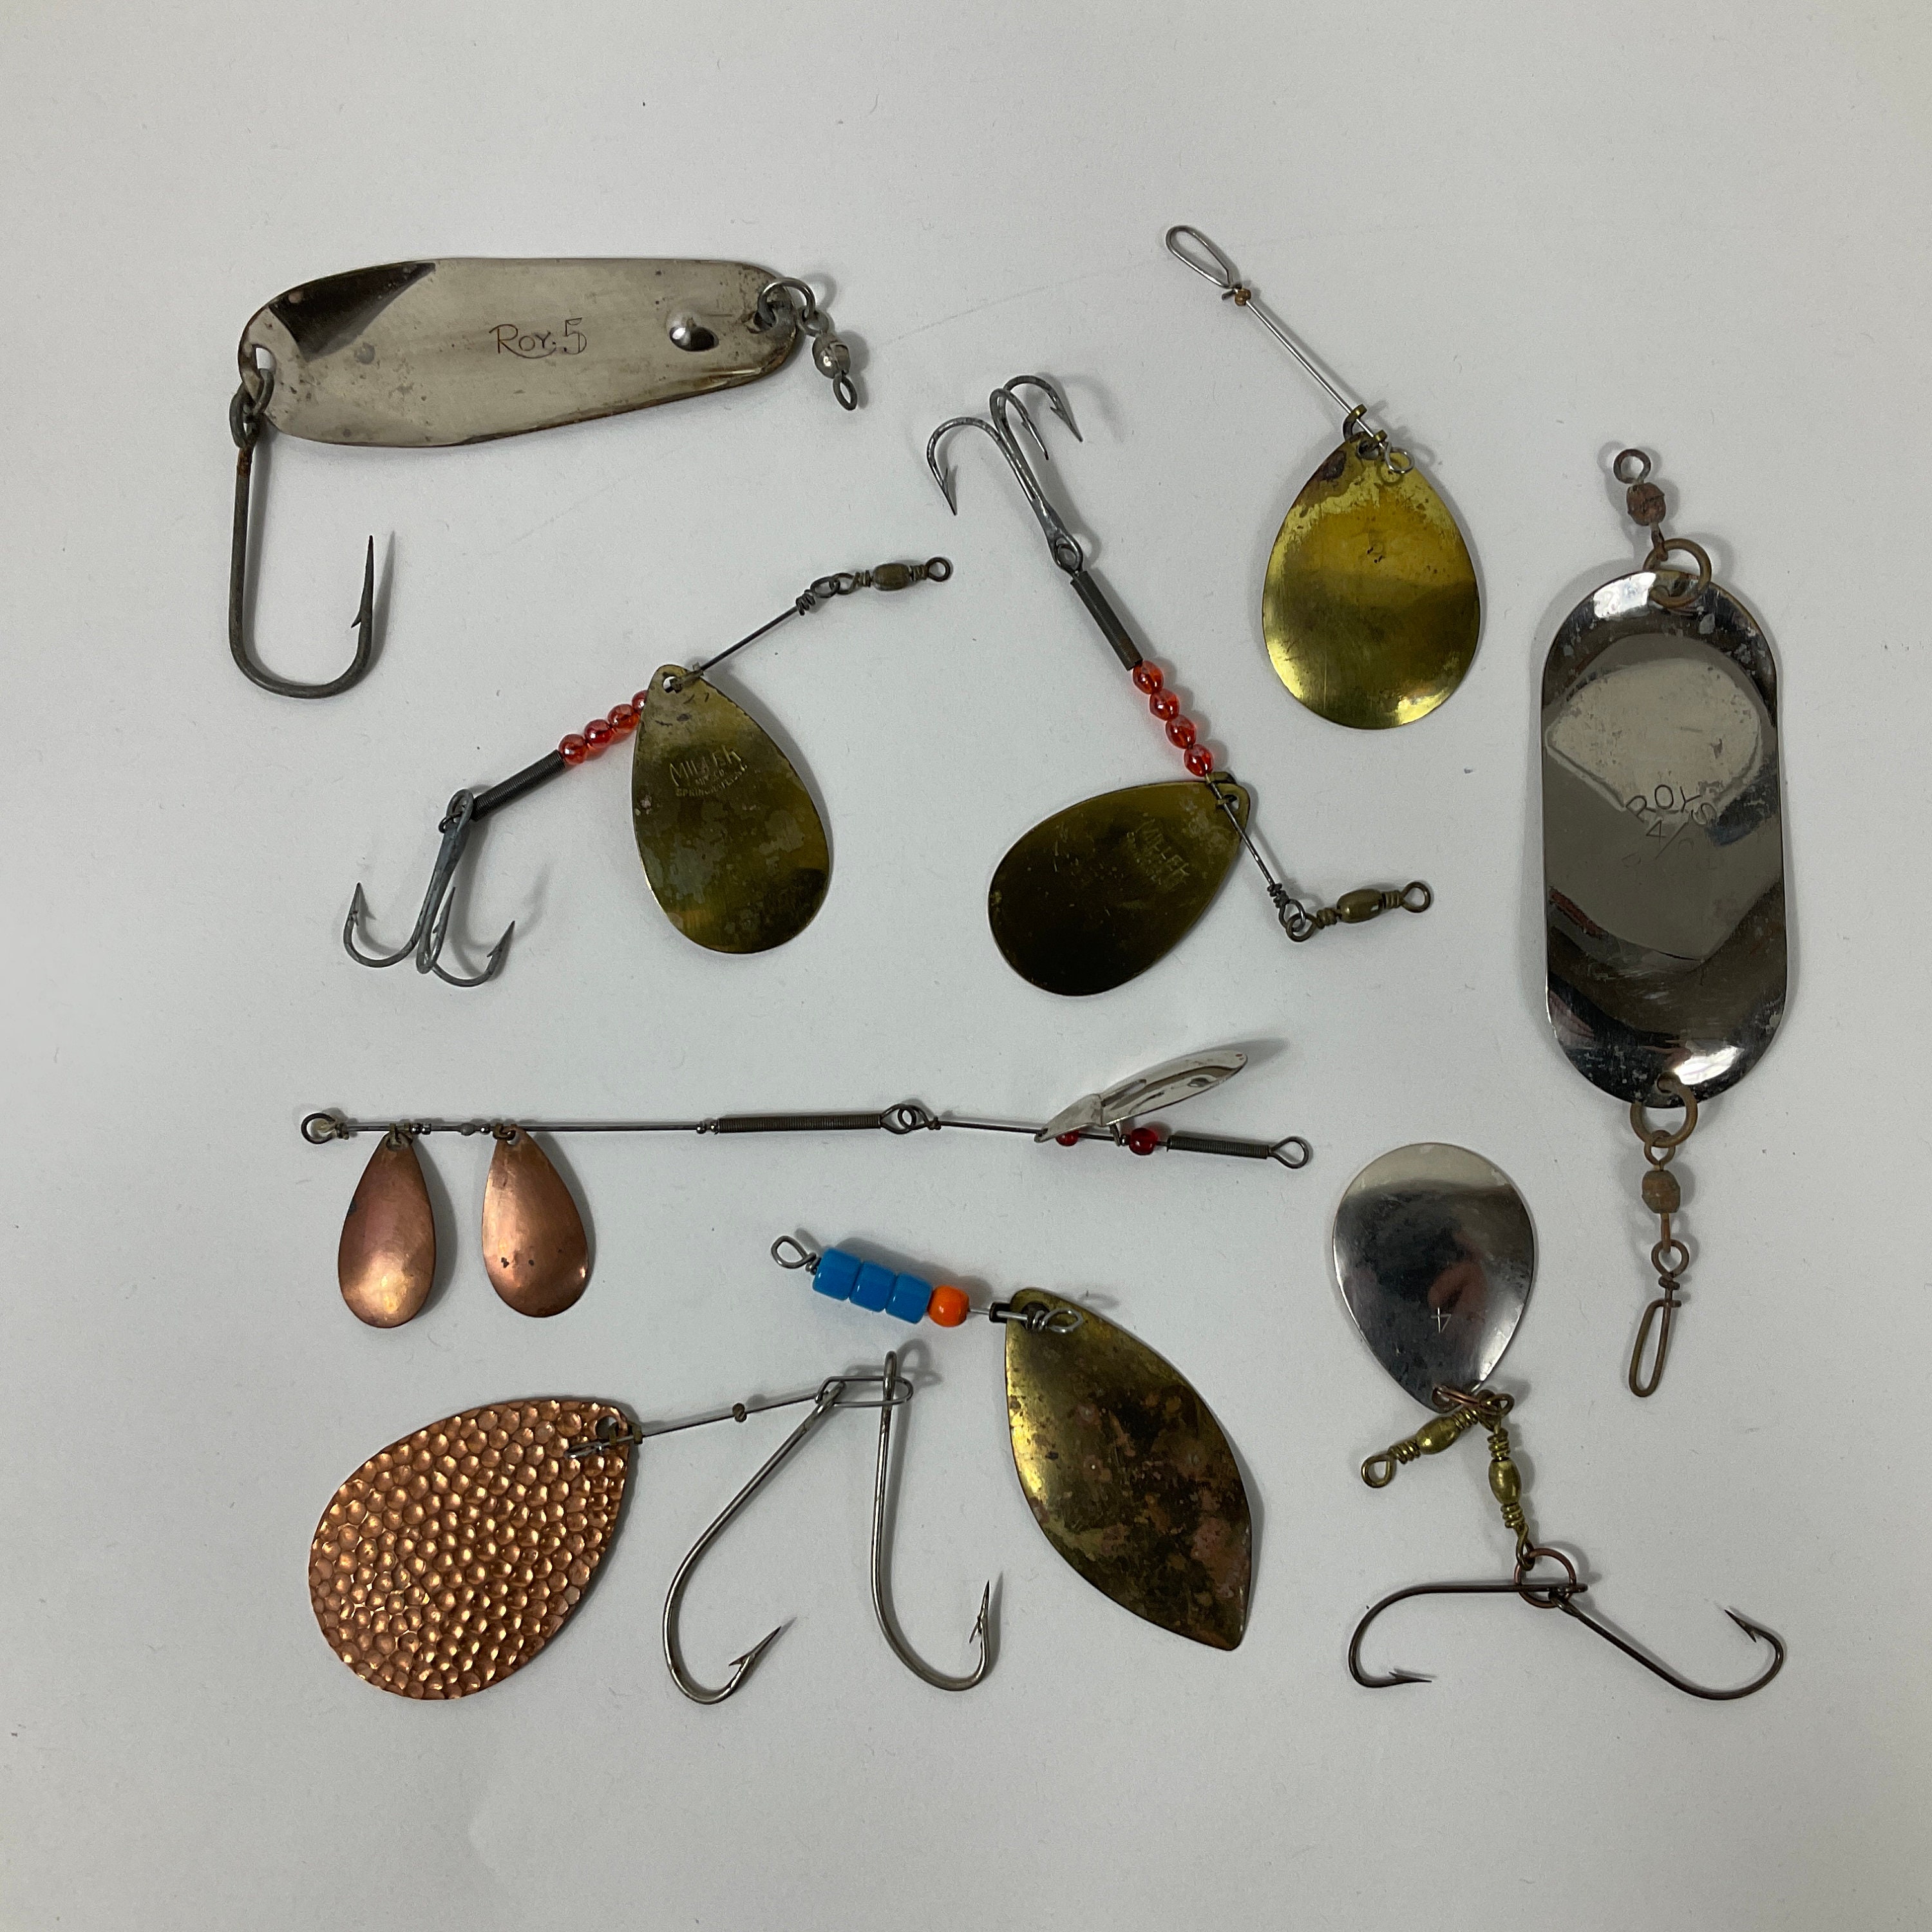 9 X Vintage American Fishing Lures & Spinners C1940s-50. Fishing or Angling  Accessories. Bass-salmon-sea Fish Lures. Retro Fishing Tackle. -  Canada